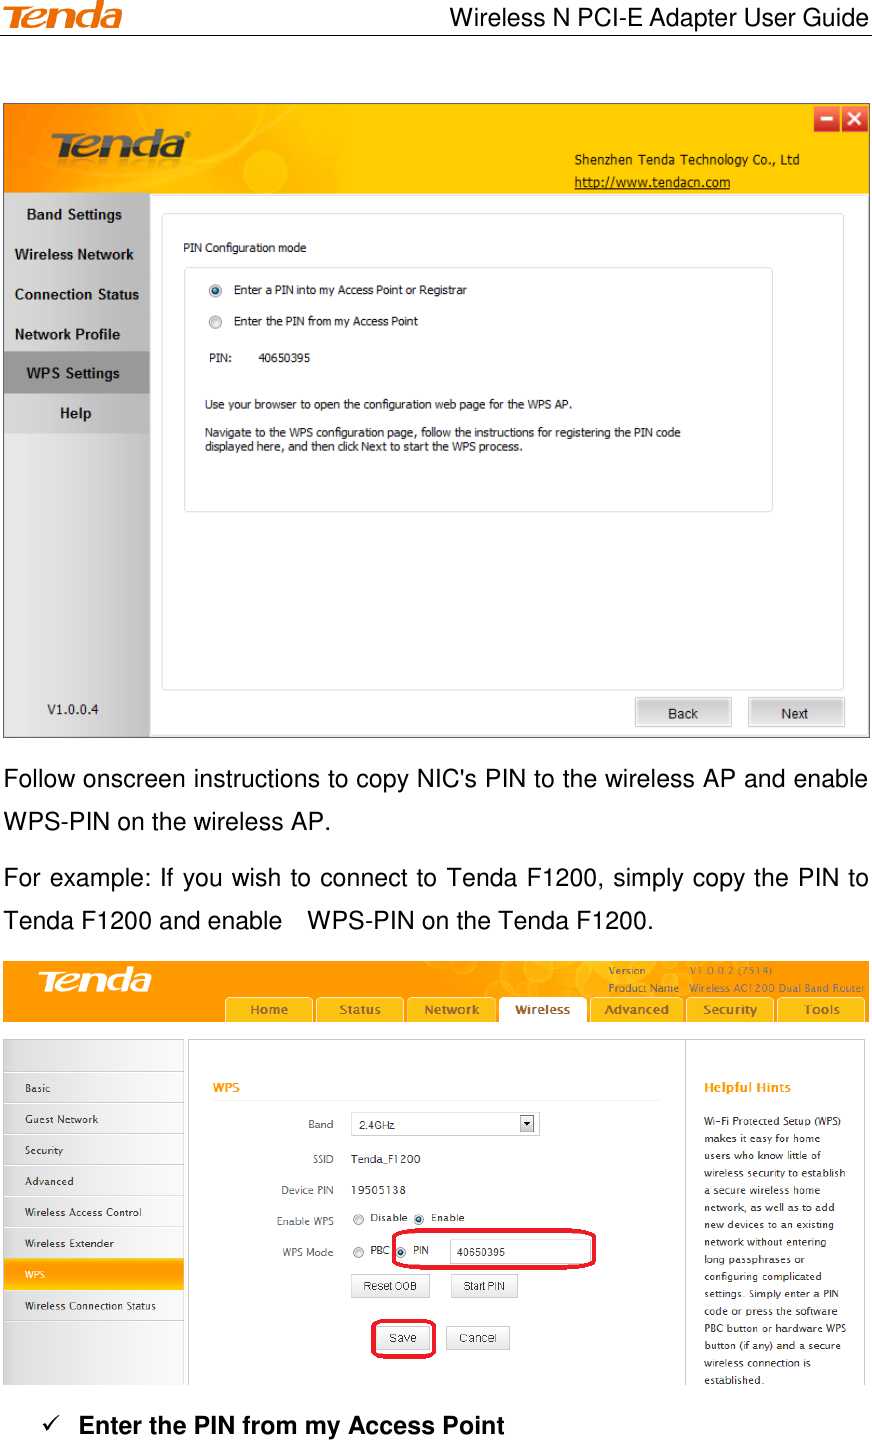                                    Wireless N PCI-E Adapter User Guide  Follow onscreen instructions to copy NIC&apos;s PIN to the wireless AP and enable WPS-PIN on the wireless AP. For example: If you wish to connect to Tenda F1200, simply copy the PIN to Tenda F1200 and enable    WPS-PIN on the Tenda F1200.   Enter the PIN from my Access Point 